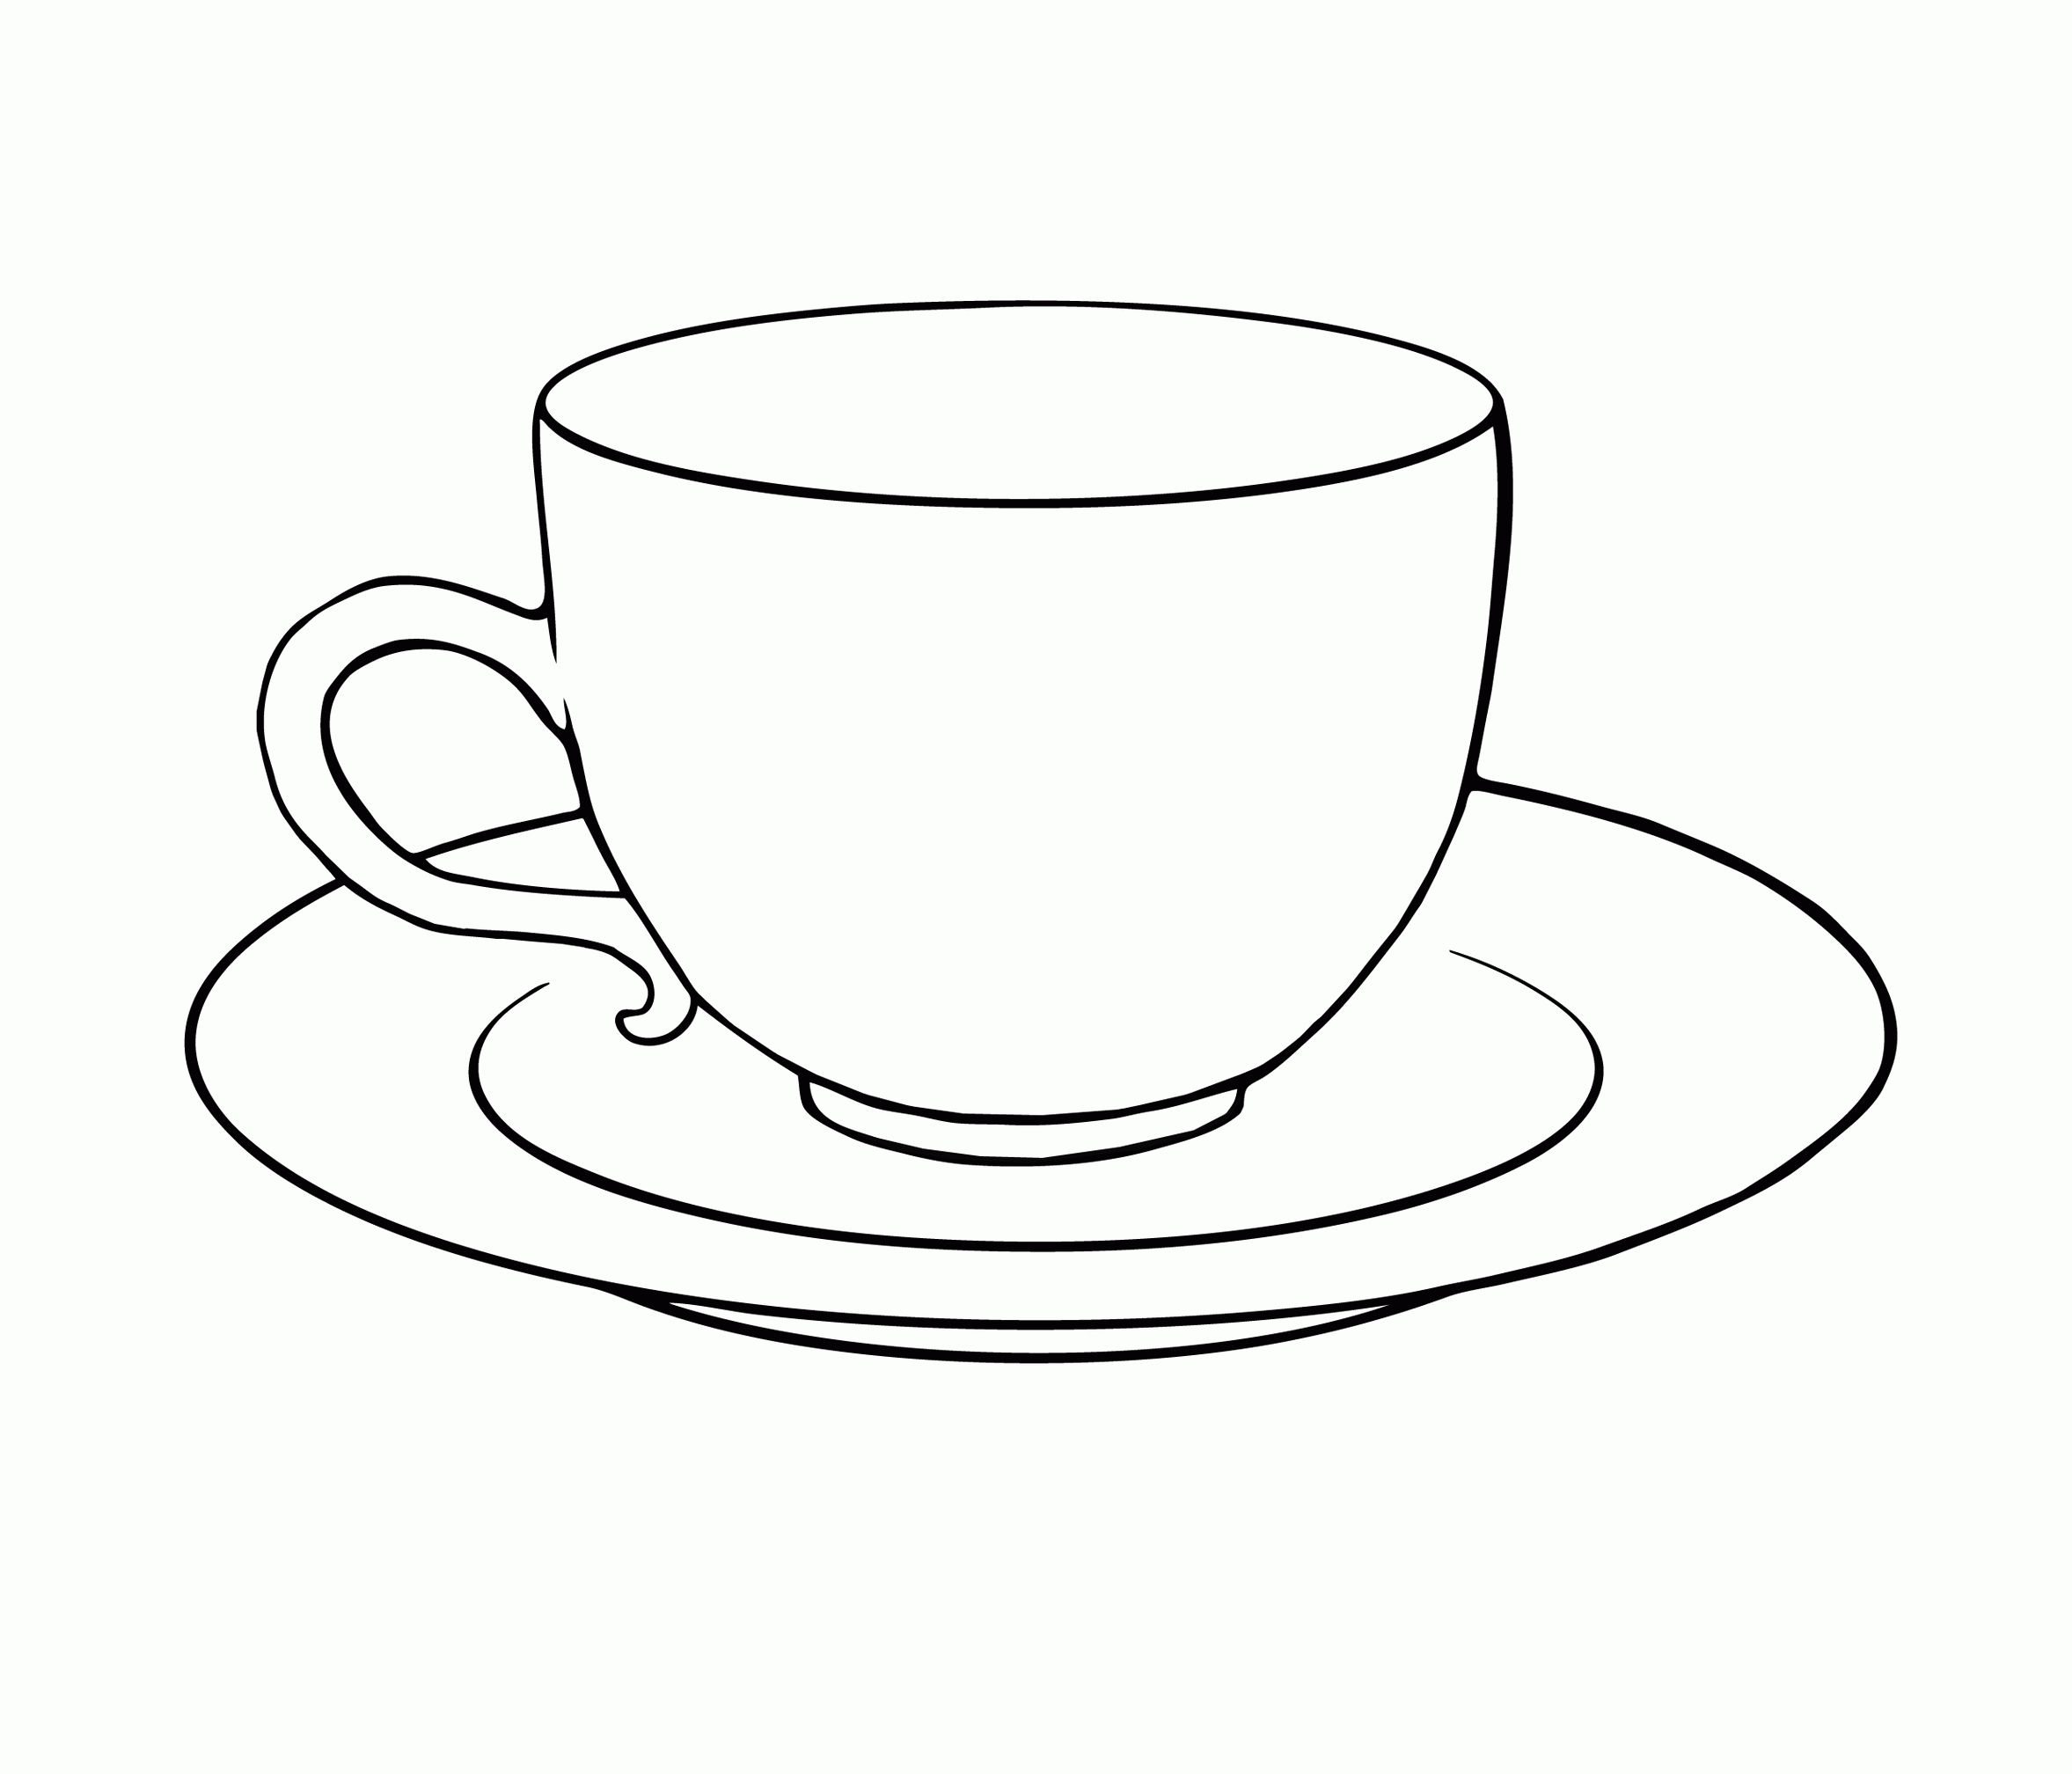 Tea Cup Colouring Page Clipart - Free To Use Clip Art Resource - Free Printable Tea Cup Coloring Pages